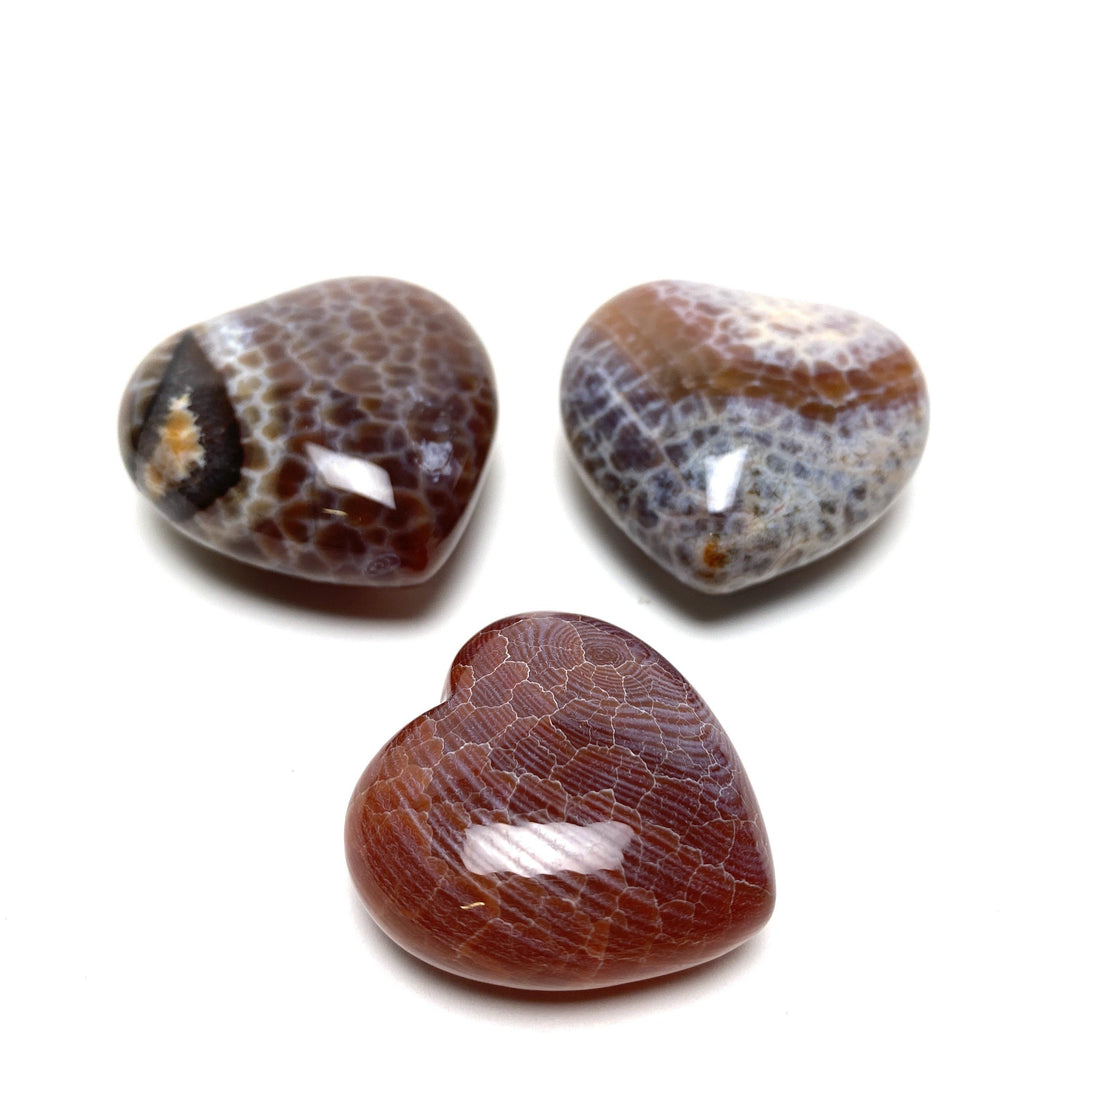 Cracked Fire Agate Heart Fire Agate Crystals A. $6.00 